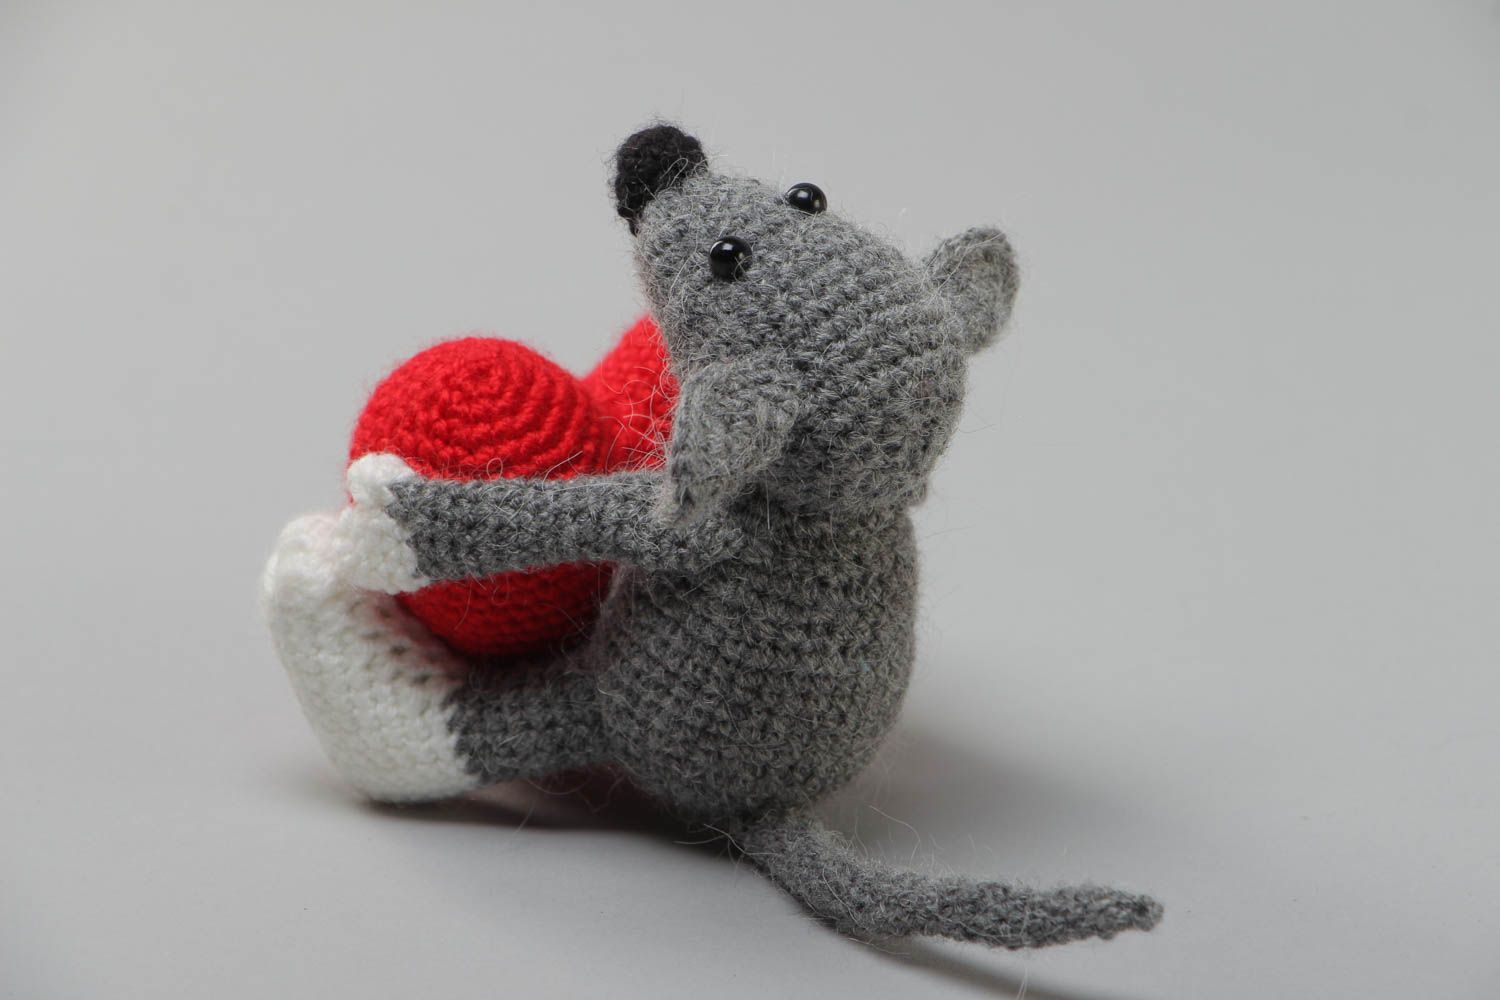 Handmade soft toy crocheted of acrylic threads small gray mouse with red heart photo 4